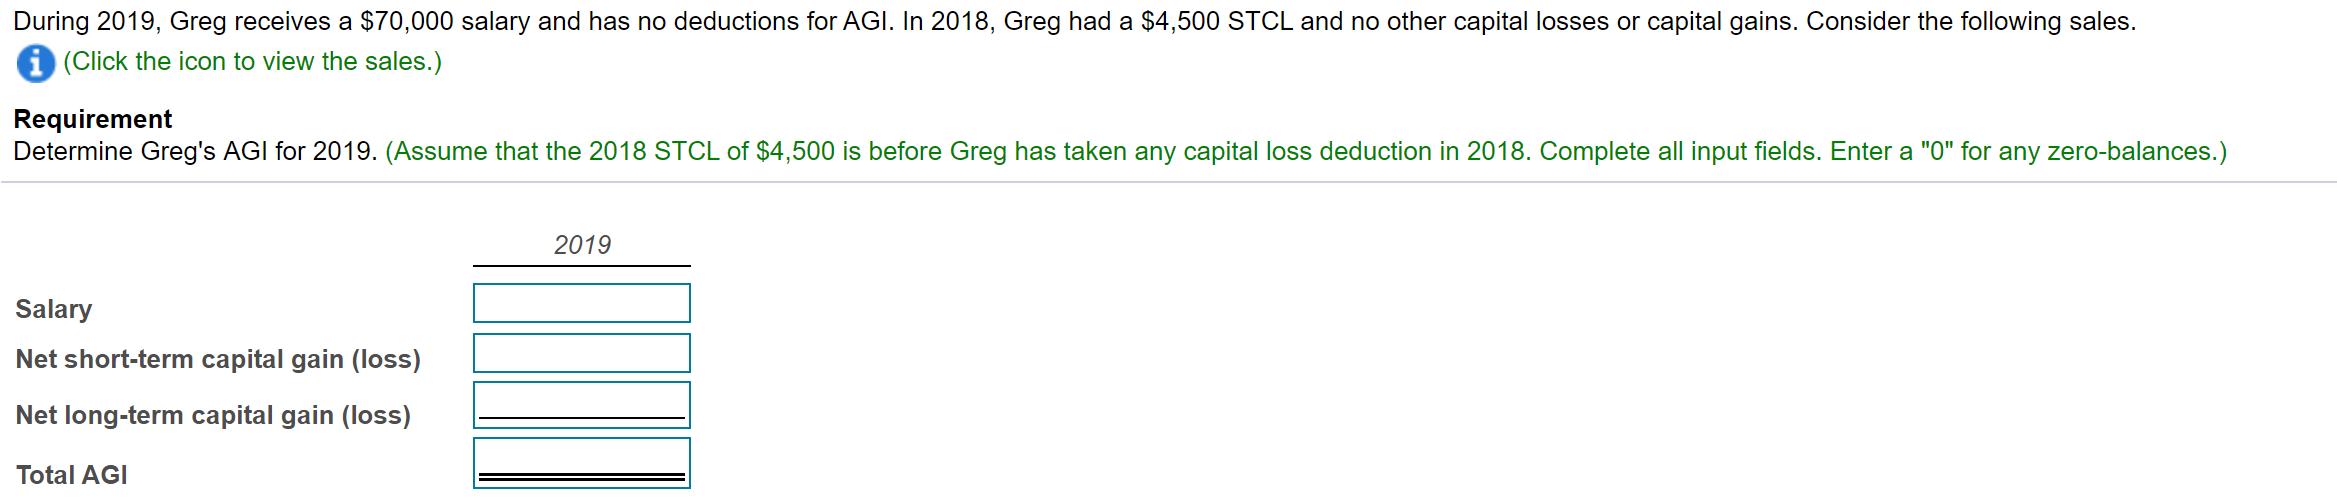 During 2019, Greg receives a $70,000 salary and has no deductions for AGI. In 2018, Greg had a $4,500 STCL and no other capit